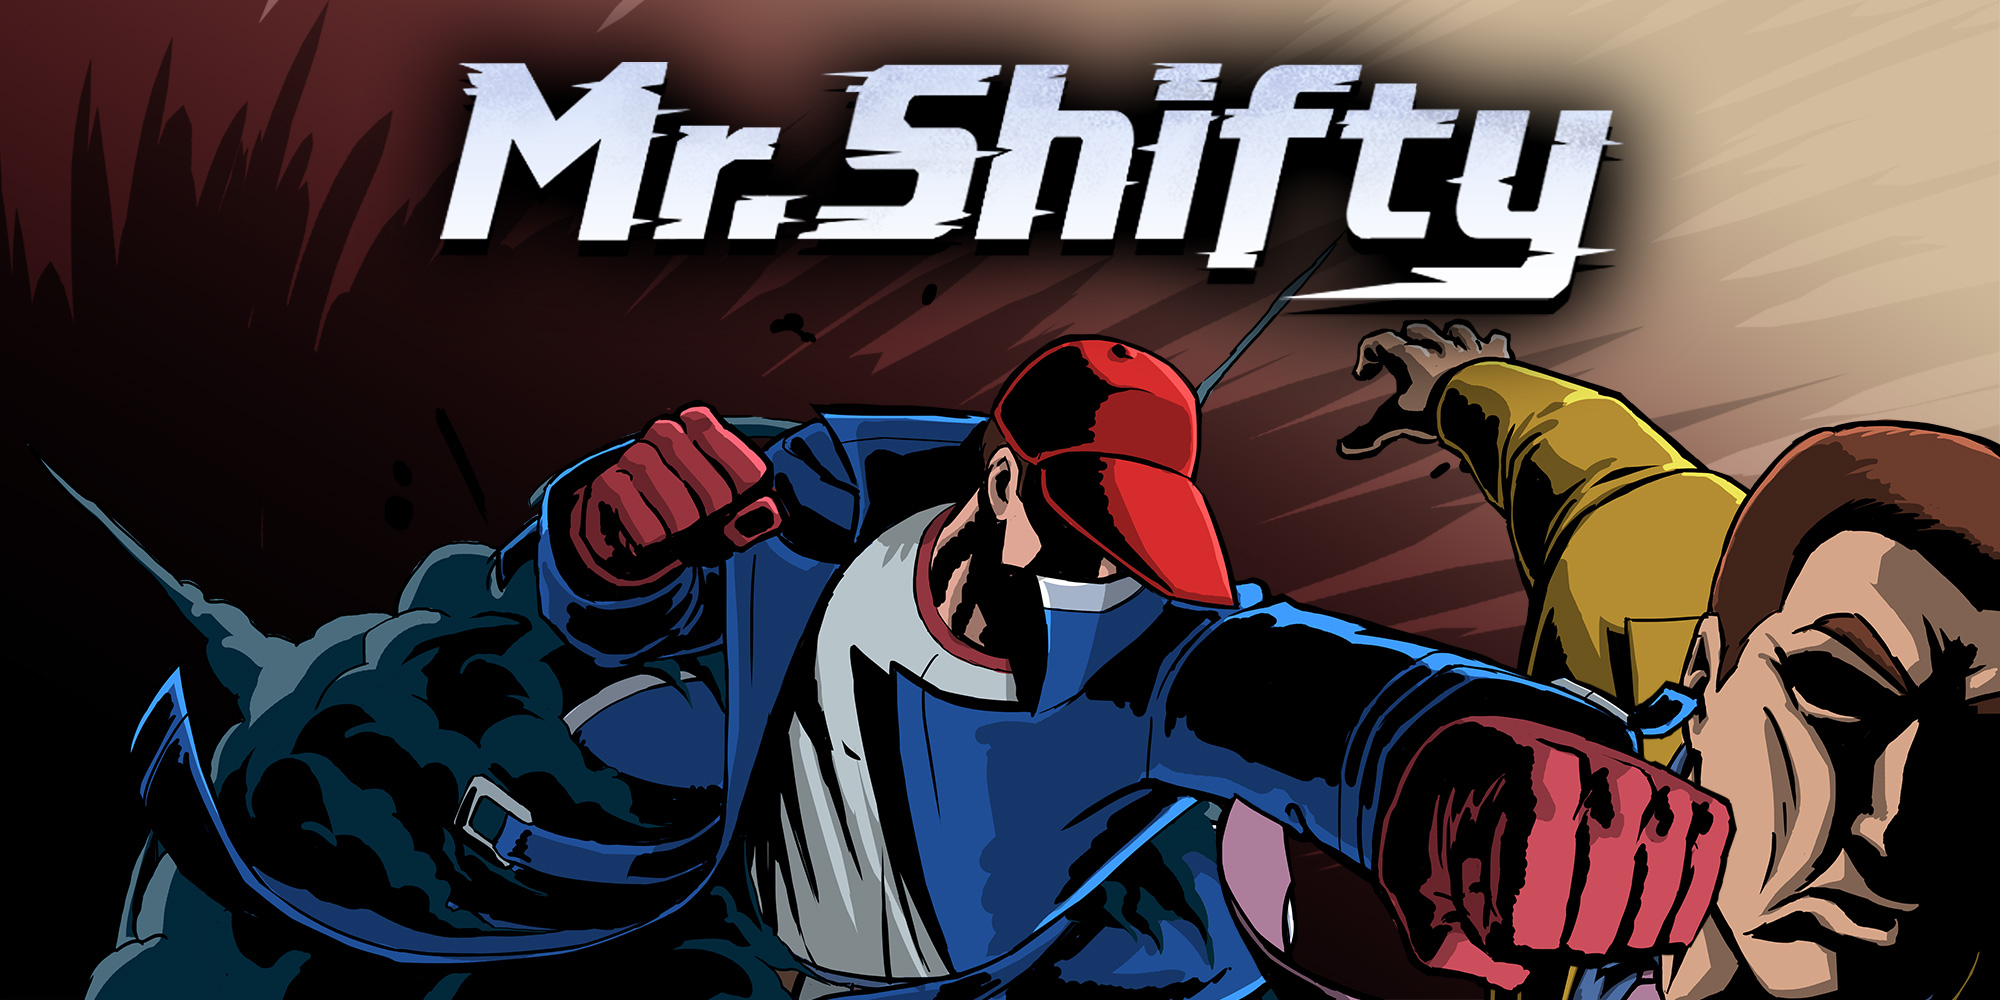 mr shifty trainer